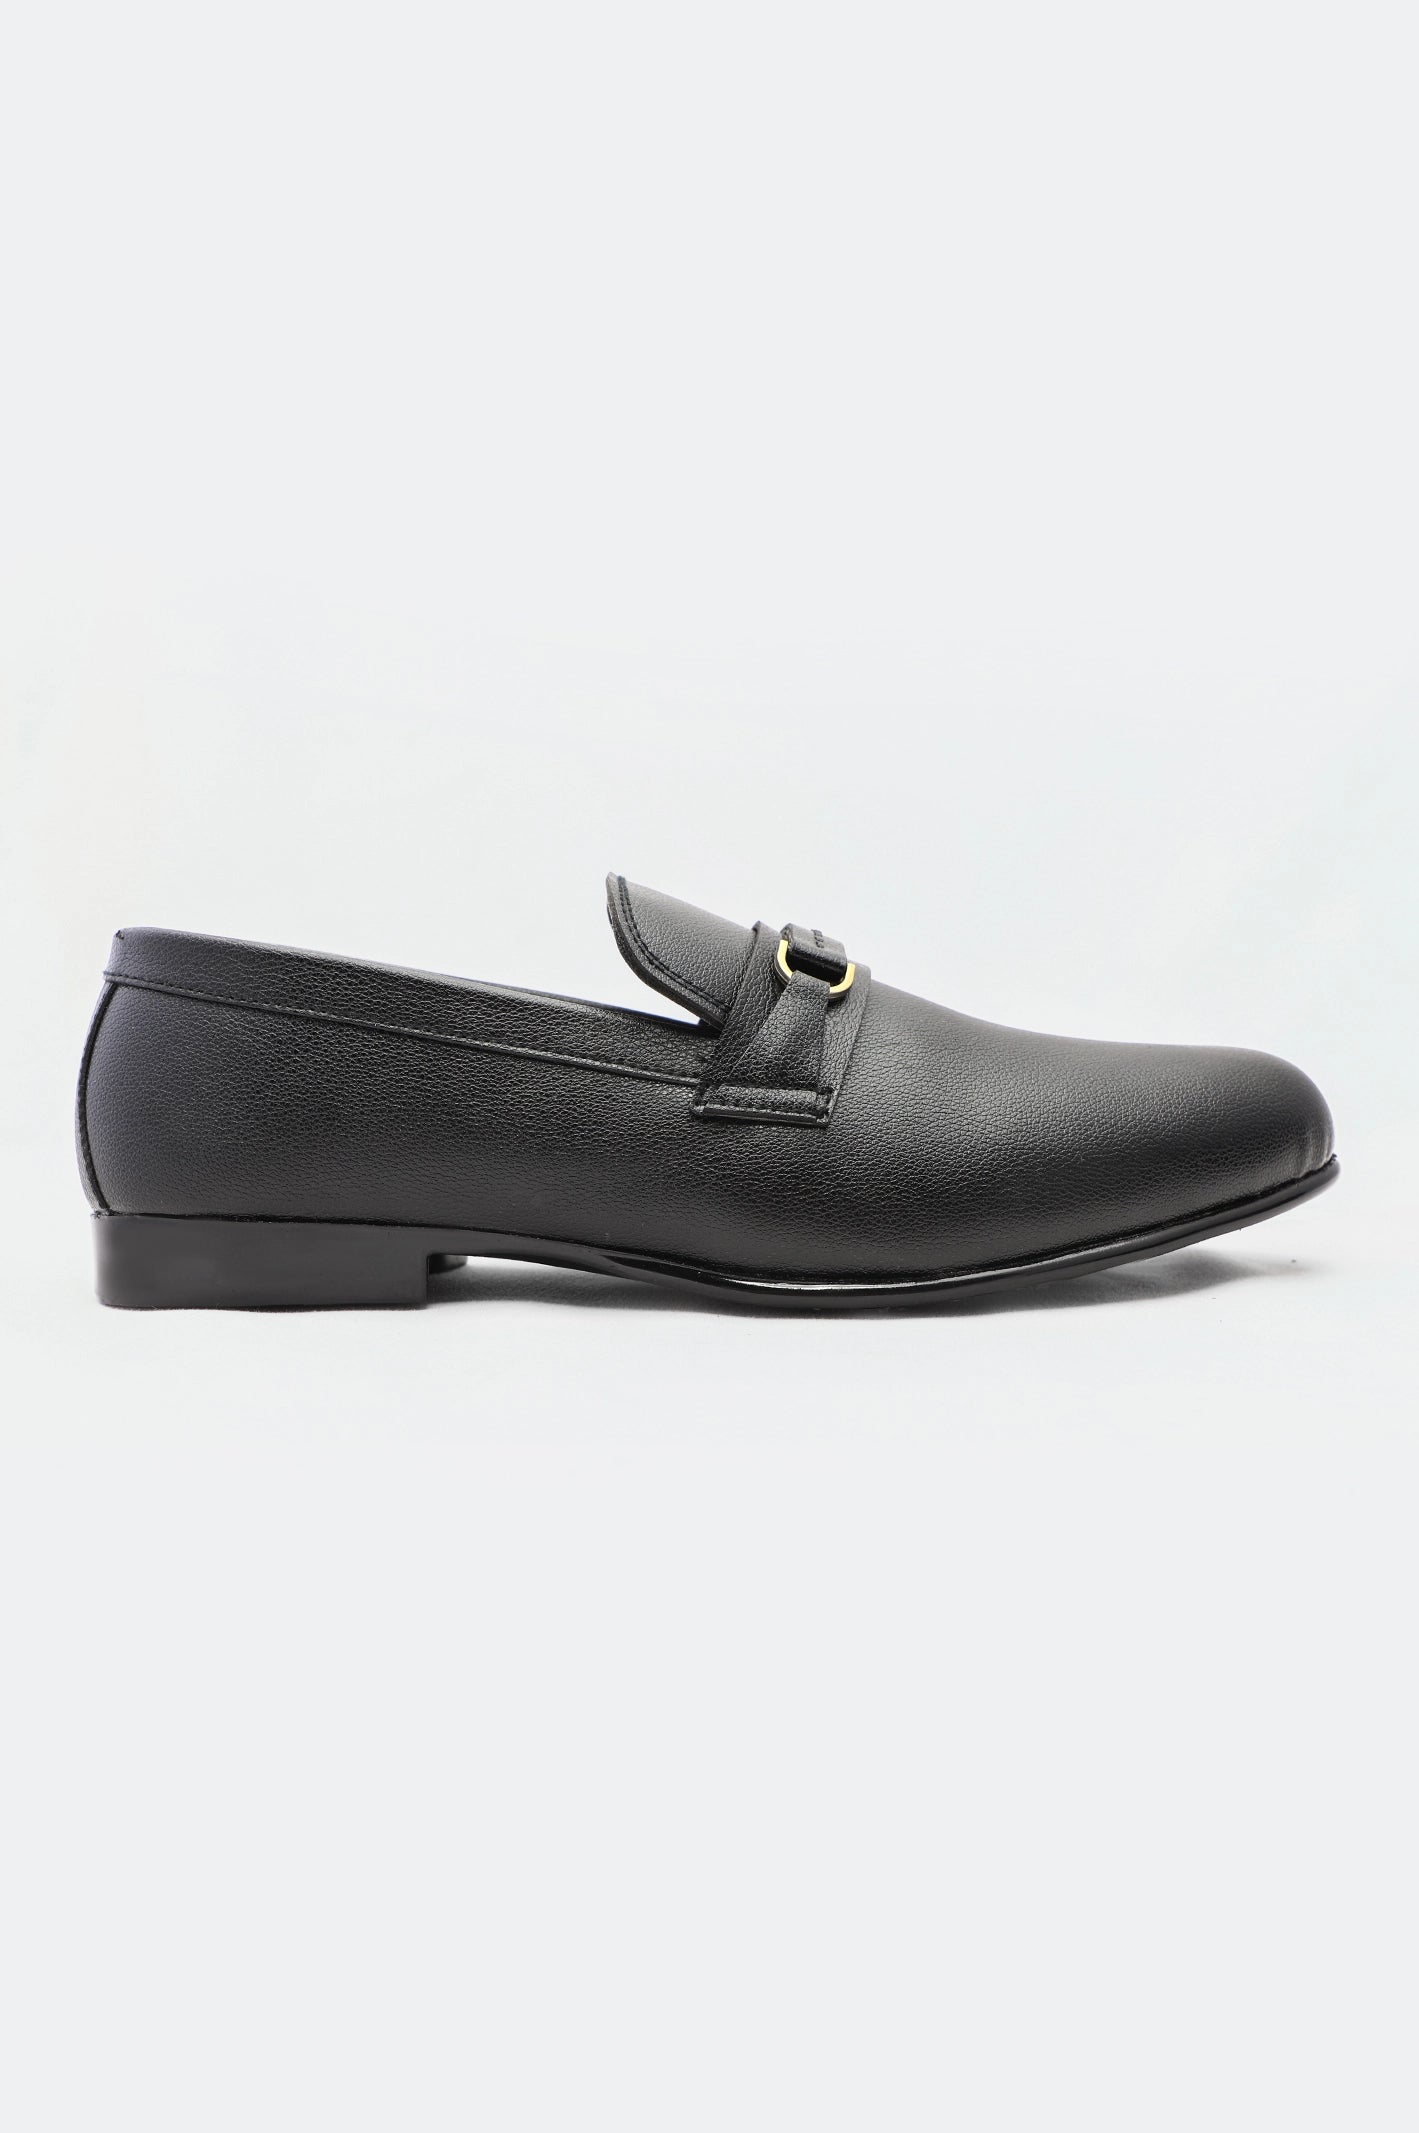 Black Formal Shoes For Men From Diners